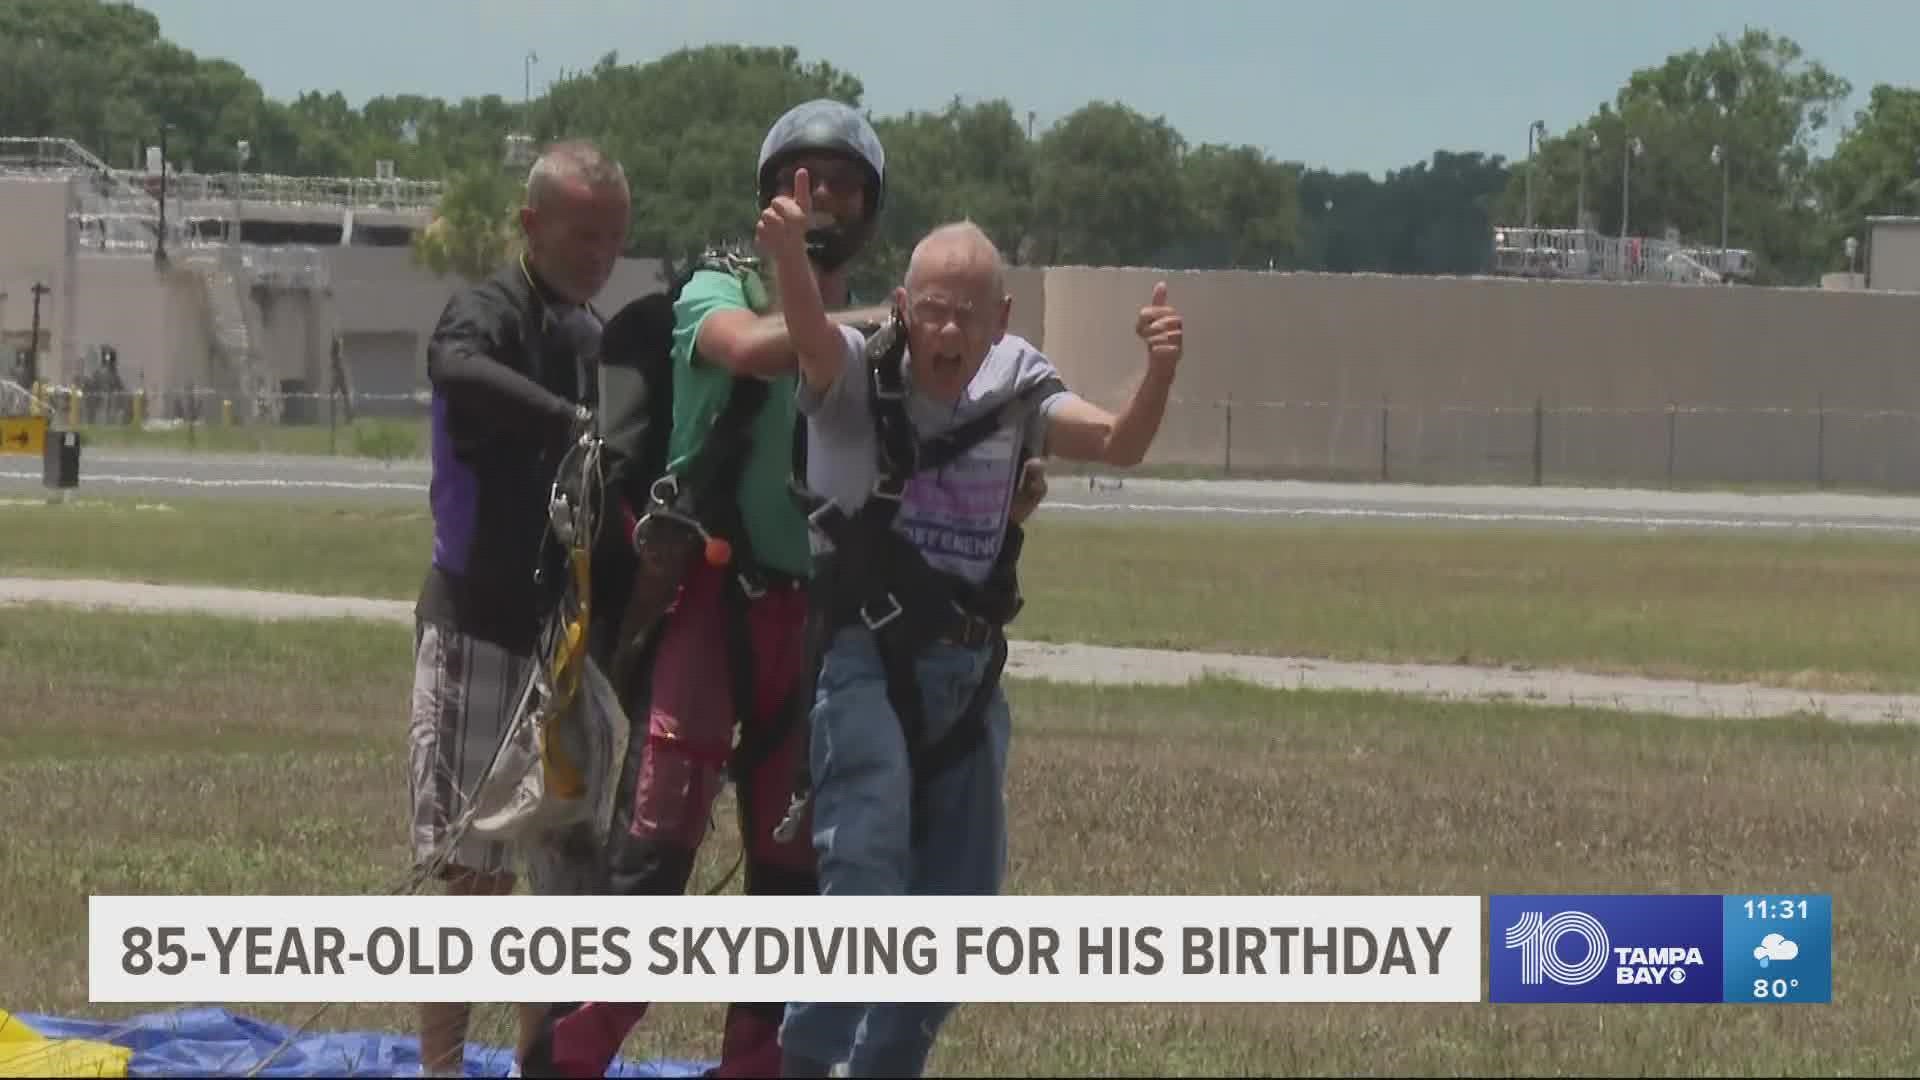 But it wasn't just for fun. The jump also helped raise money for Meals on Wheels in Pinellas County.